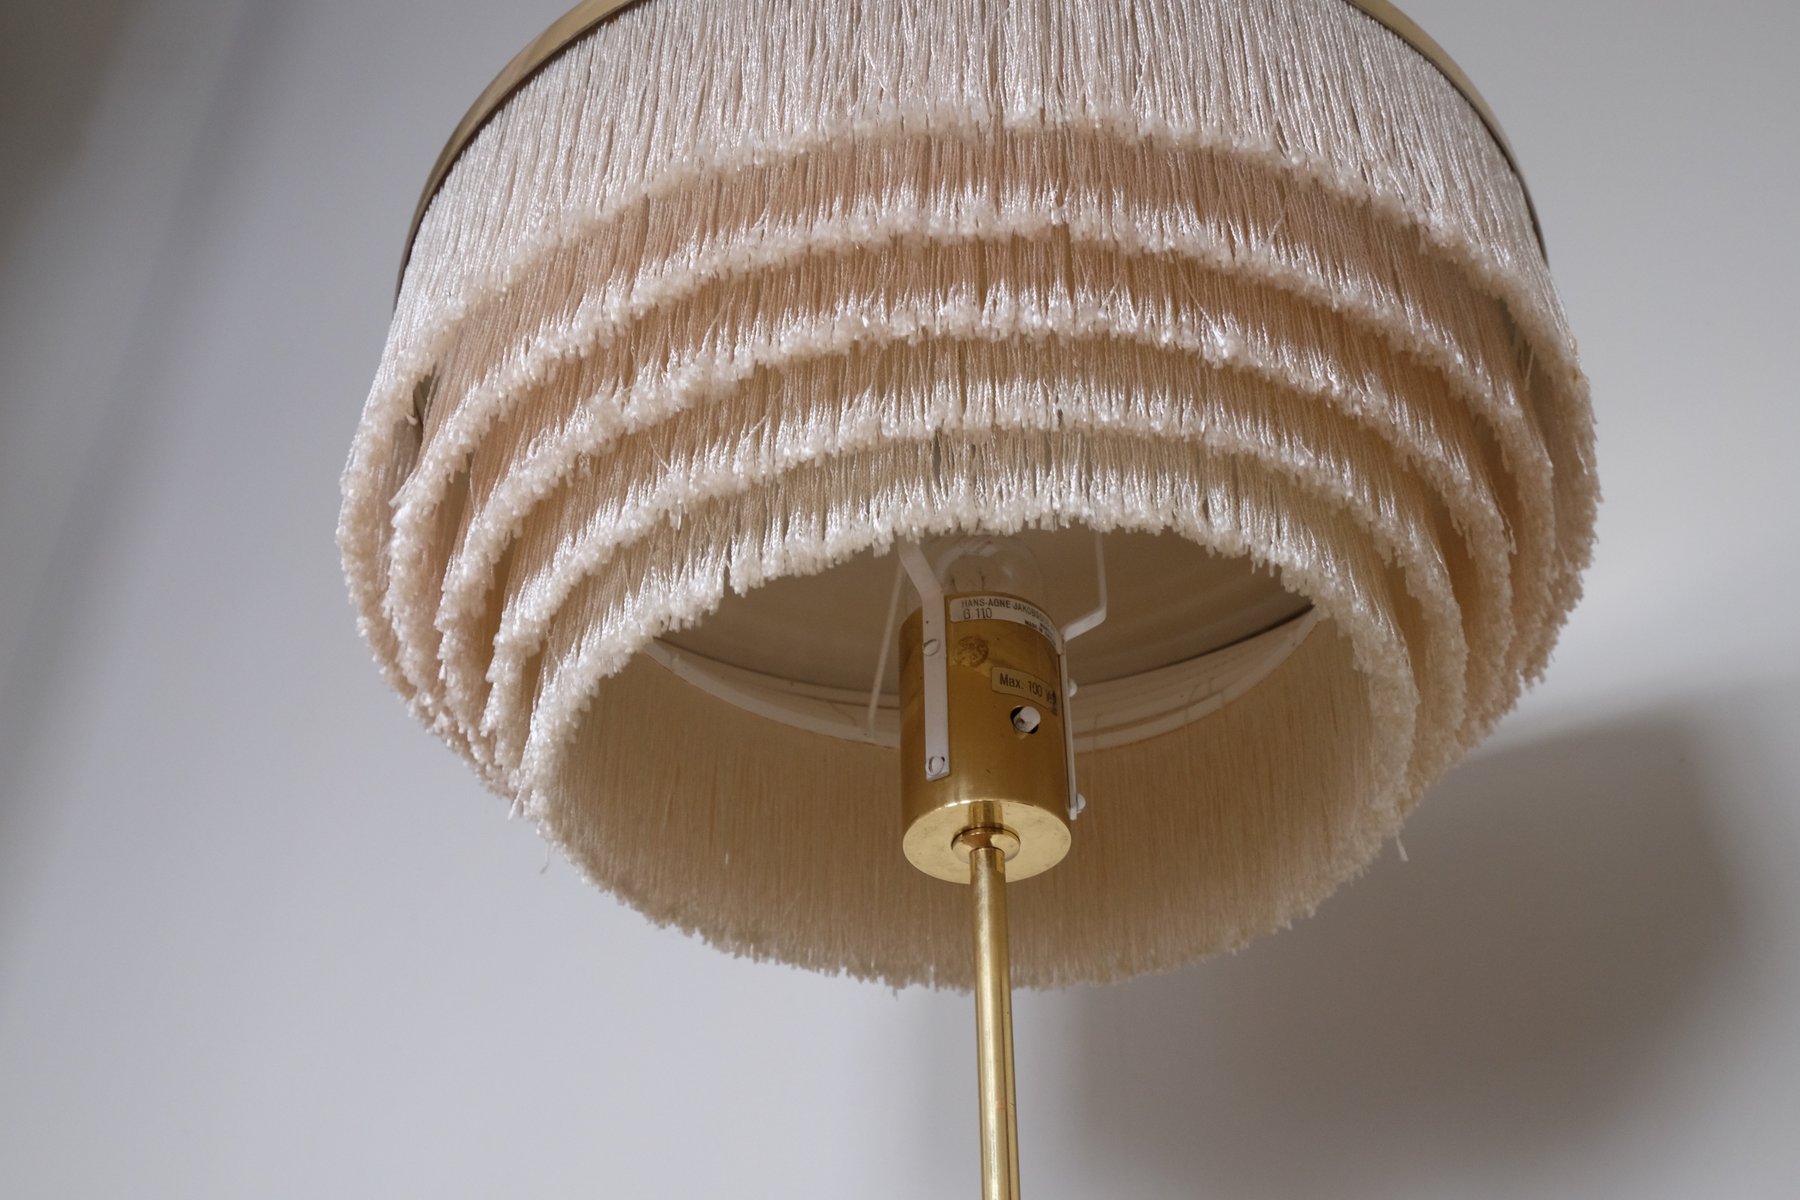 Model G-110 Floor Lamp by Hans-Agne Jakobsson, 1965 for sale at Pamono